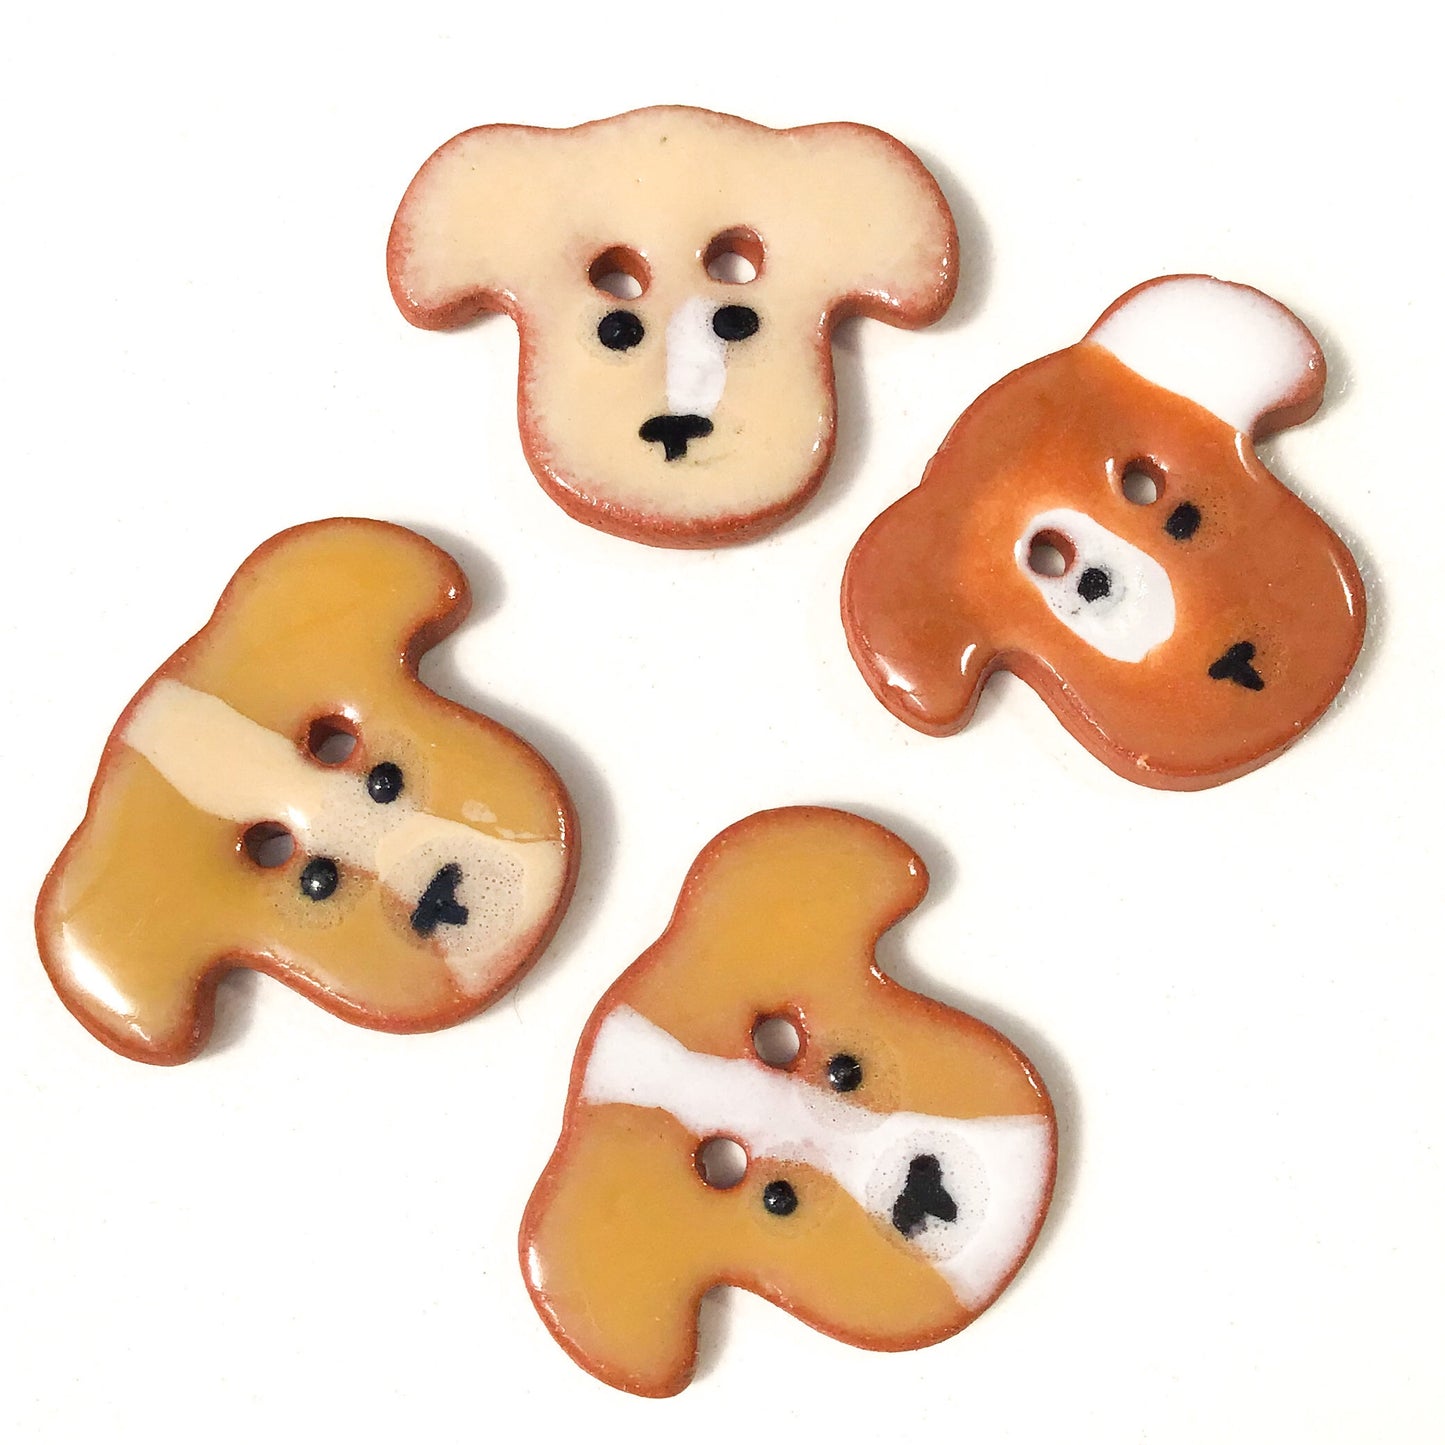 Dog Buttons - Ceramic Dog Buttons - 3/4" x 7/8" - 4 Pack